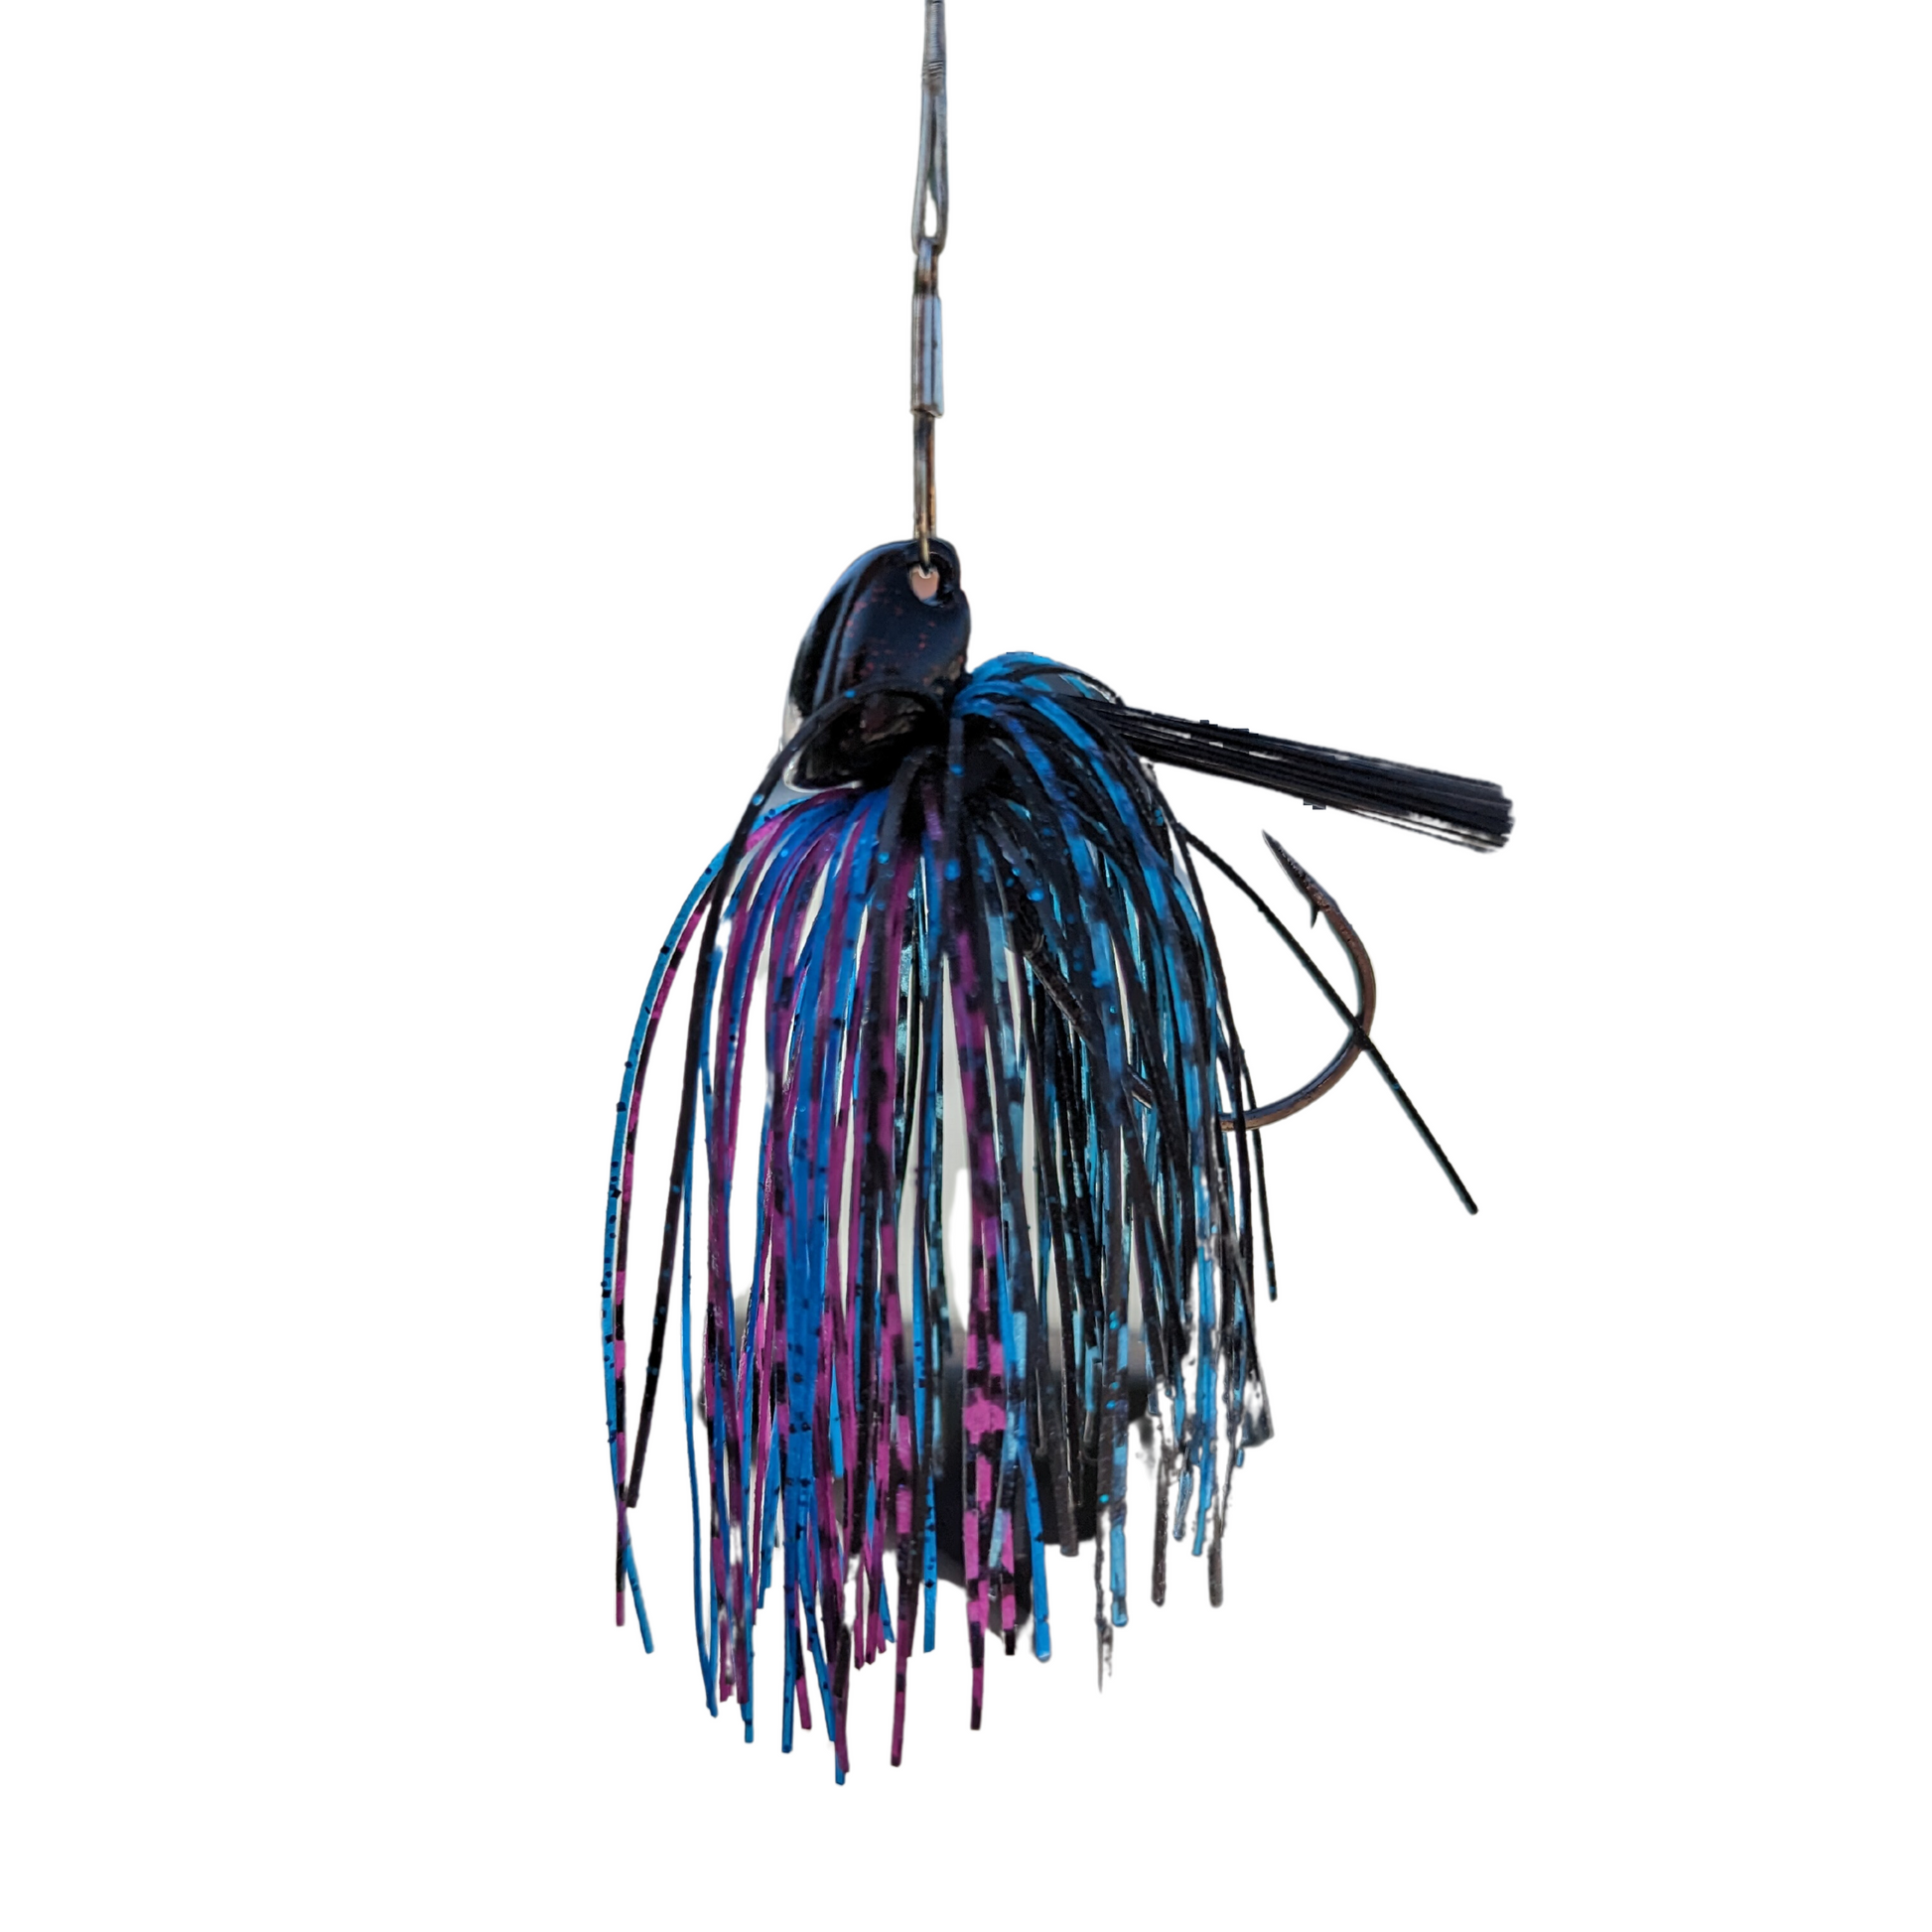 Bright color blue black purple jig with linker skirt for bass fishing with weed guard and hidden eye